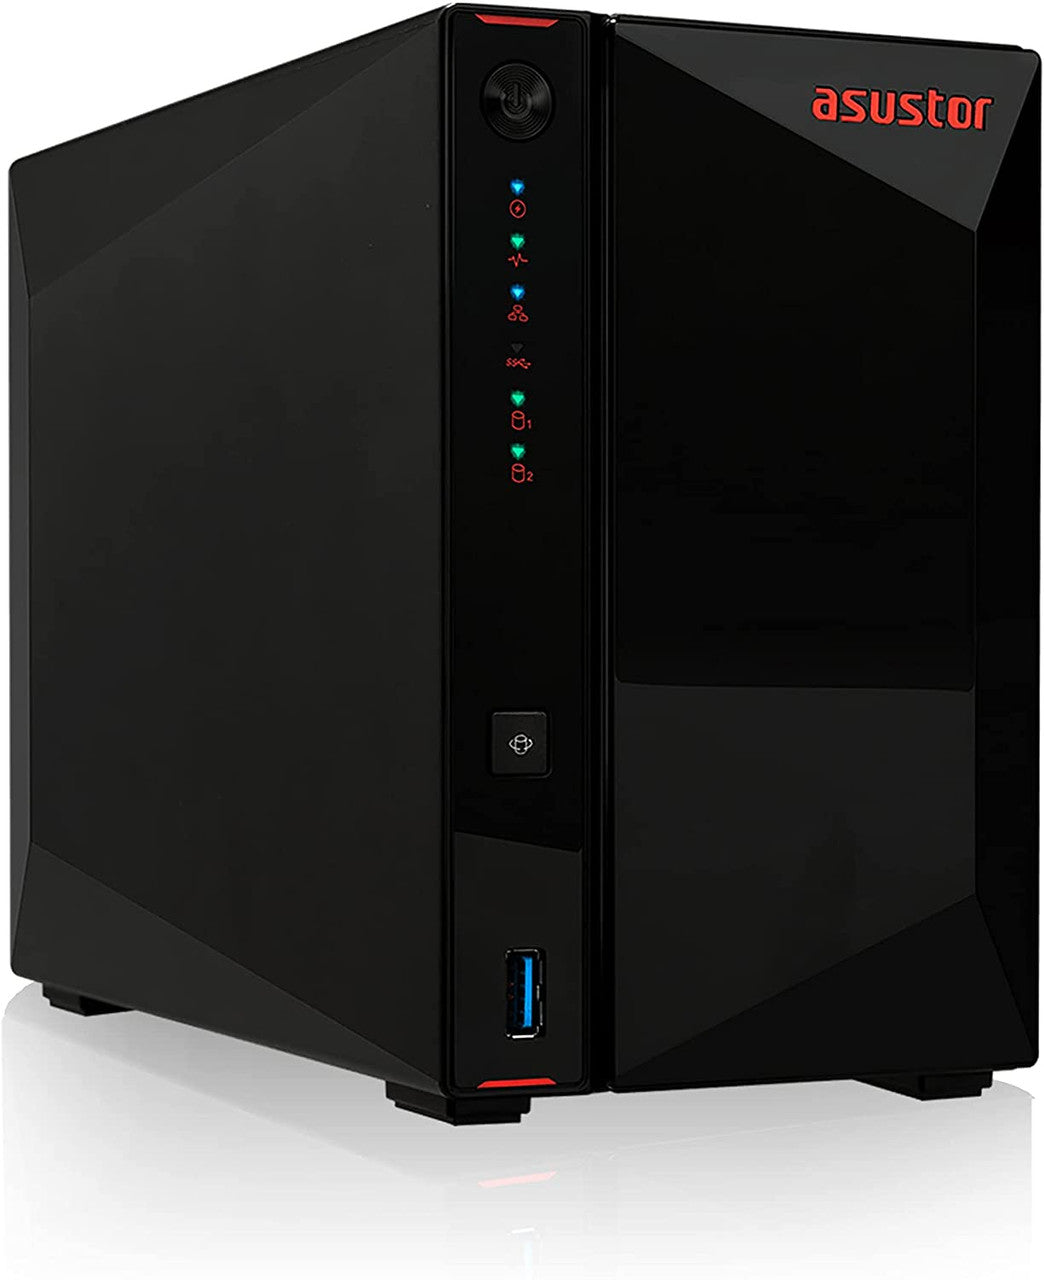 Asustor AS5202T 2-Bay Nimbustor 2 NAS with 2GB RAM and 20TB (2 x 10TB) Seagate Ironwolf PRO Drives Fully Assembled and Tested